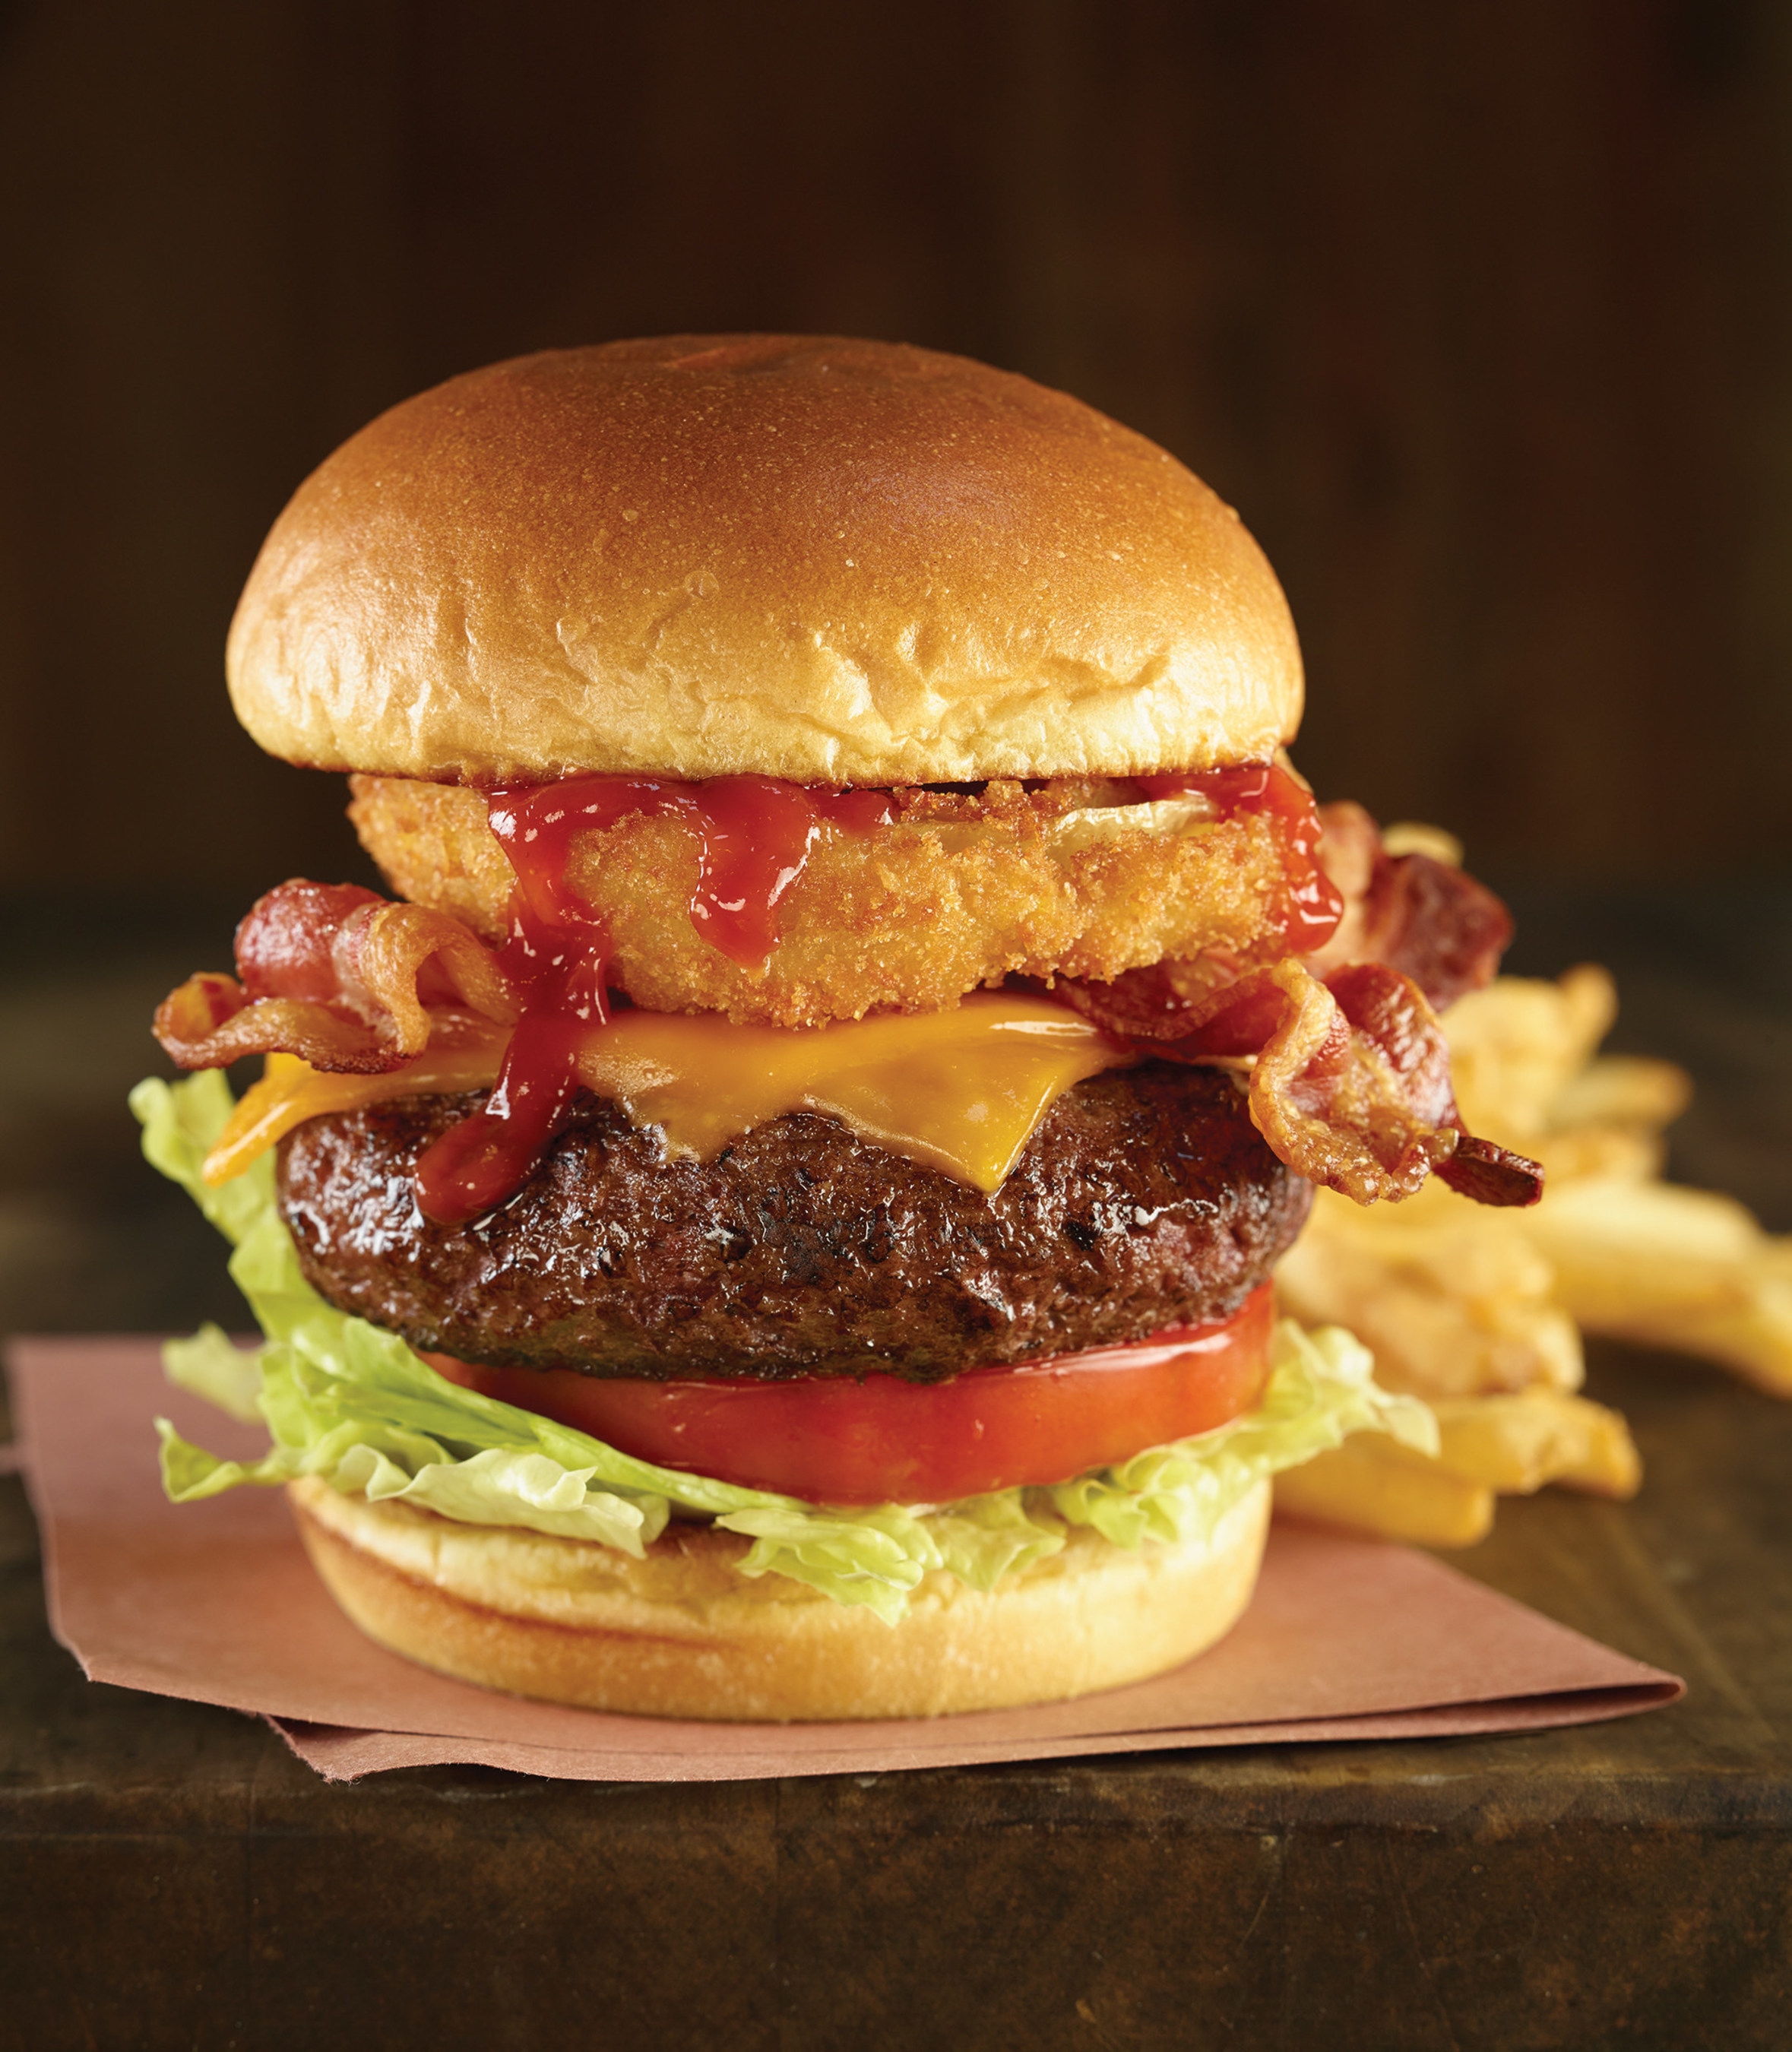 Hard Rock has drummed up the perfect reward for Americans after they pay up to Uncle Sam on Tax Day - and it will be music to taxpayers' ears. On Monday, April 18, Hard Rock Cafe guests who channel their inner artist and sing a song on the cafe stage will receive a free Legendary Burger (TM).